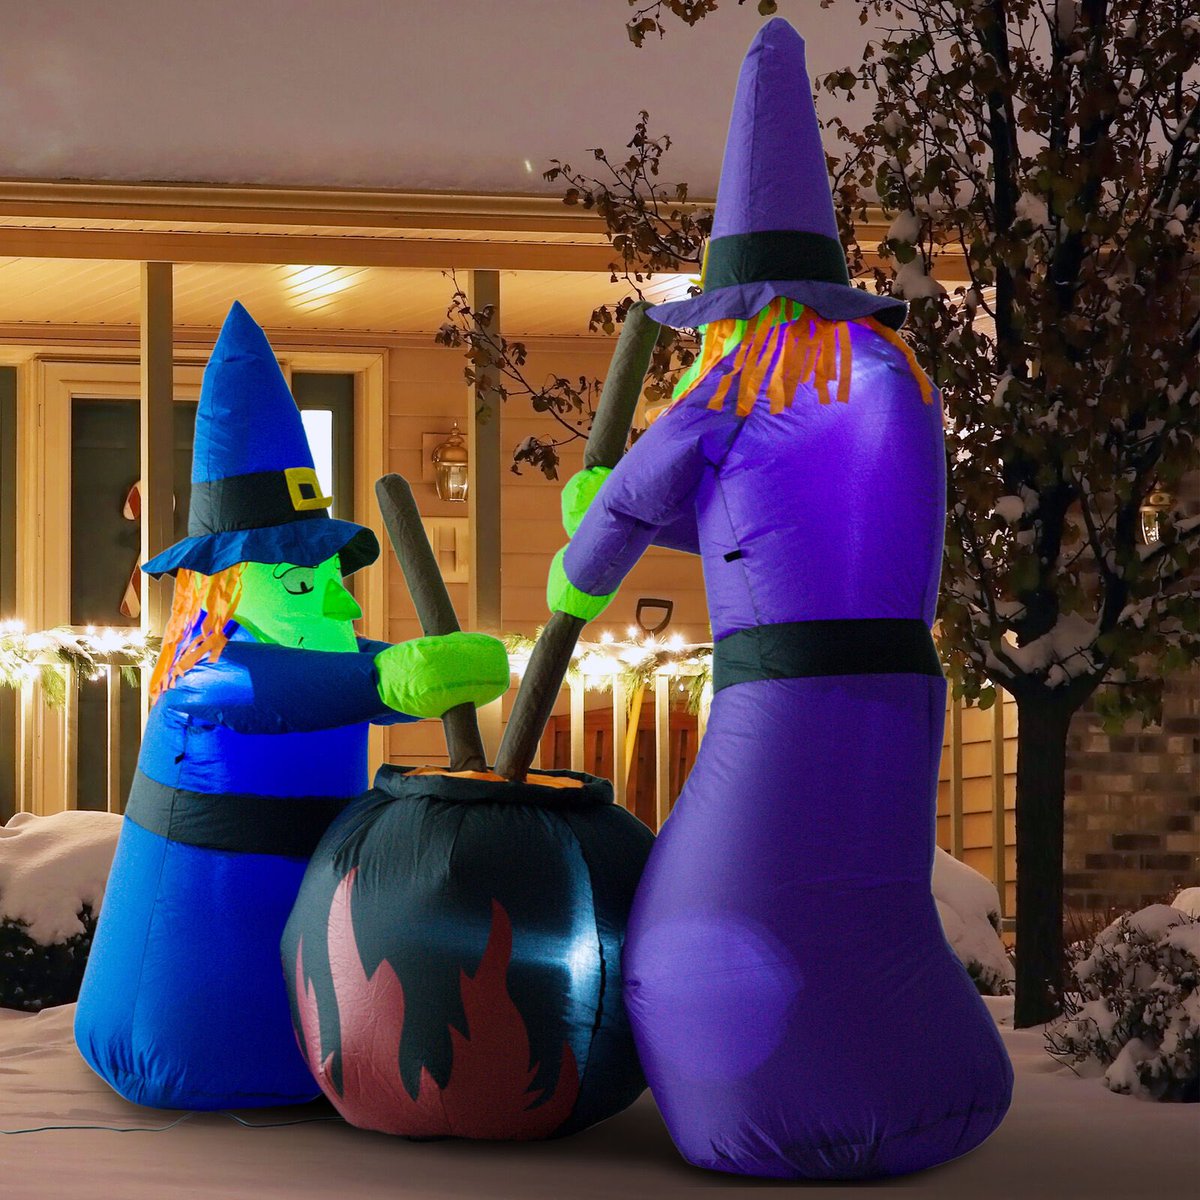 1.8m Inflatable Halloween Witches Cauldron Light Airblown
Price £45.99
Link: tidd.ly/3okK6D9 #ad

#witches #witchescauldron #inflatablewitches #halloweeninflatables #lightupwitches #halloweenlovers #halloween2021 #halloweendecorations #halloweenlights #trickortreat